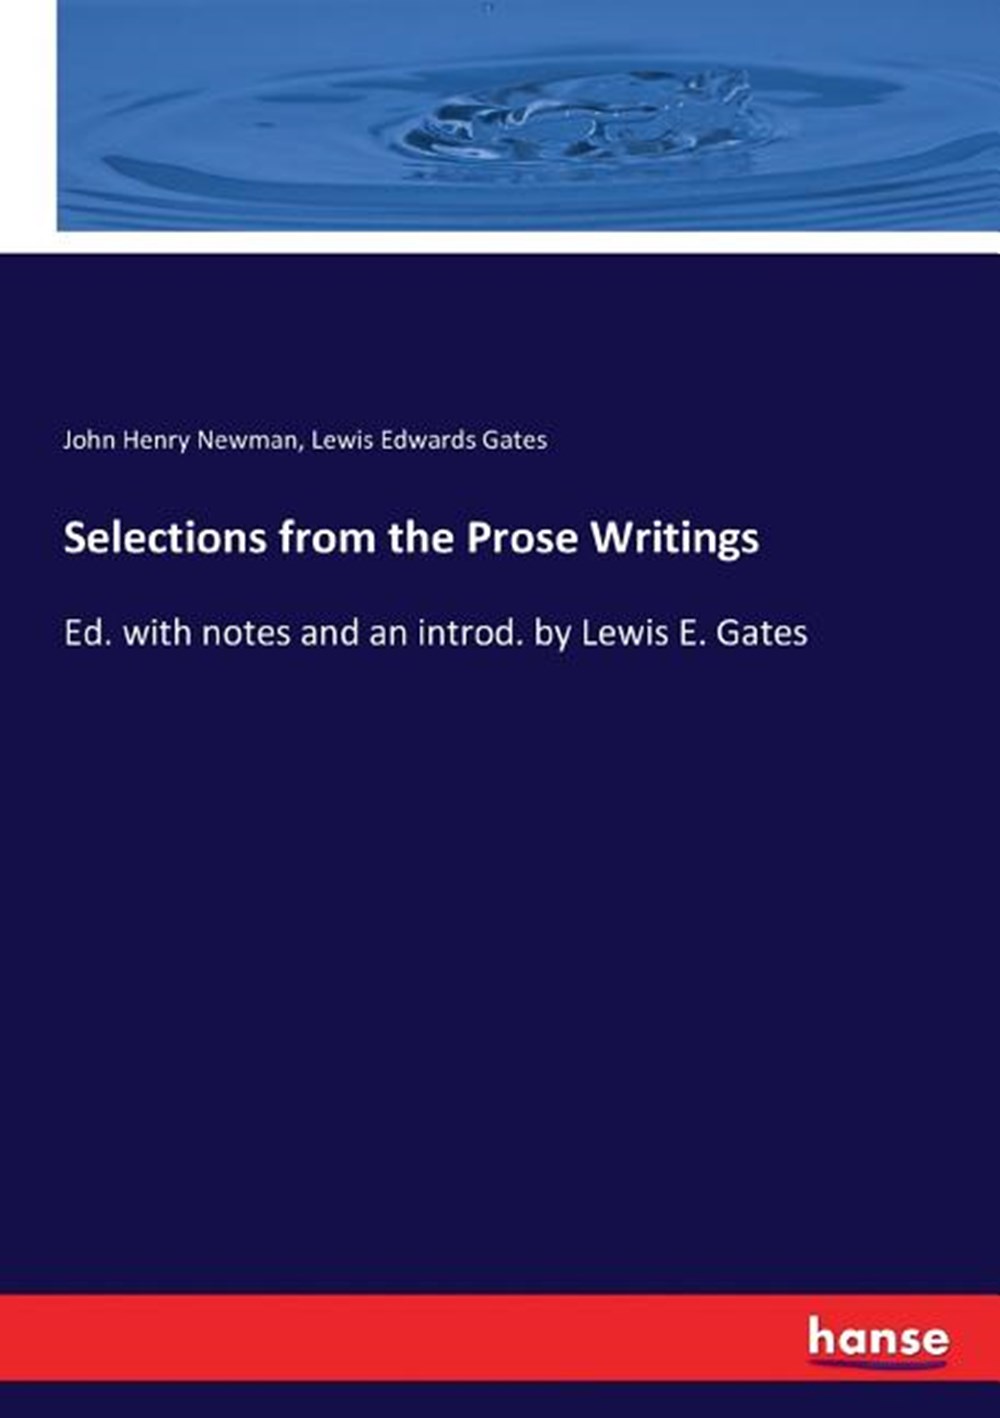 Selections from the Prose Writings: Ed. with notes and an introd. by Lewis E. Gates